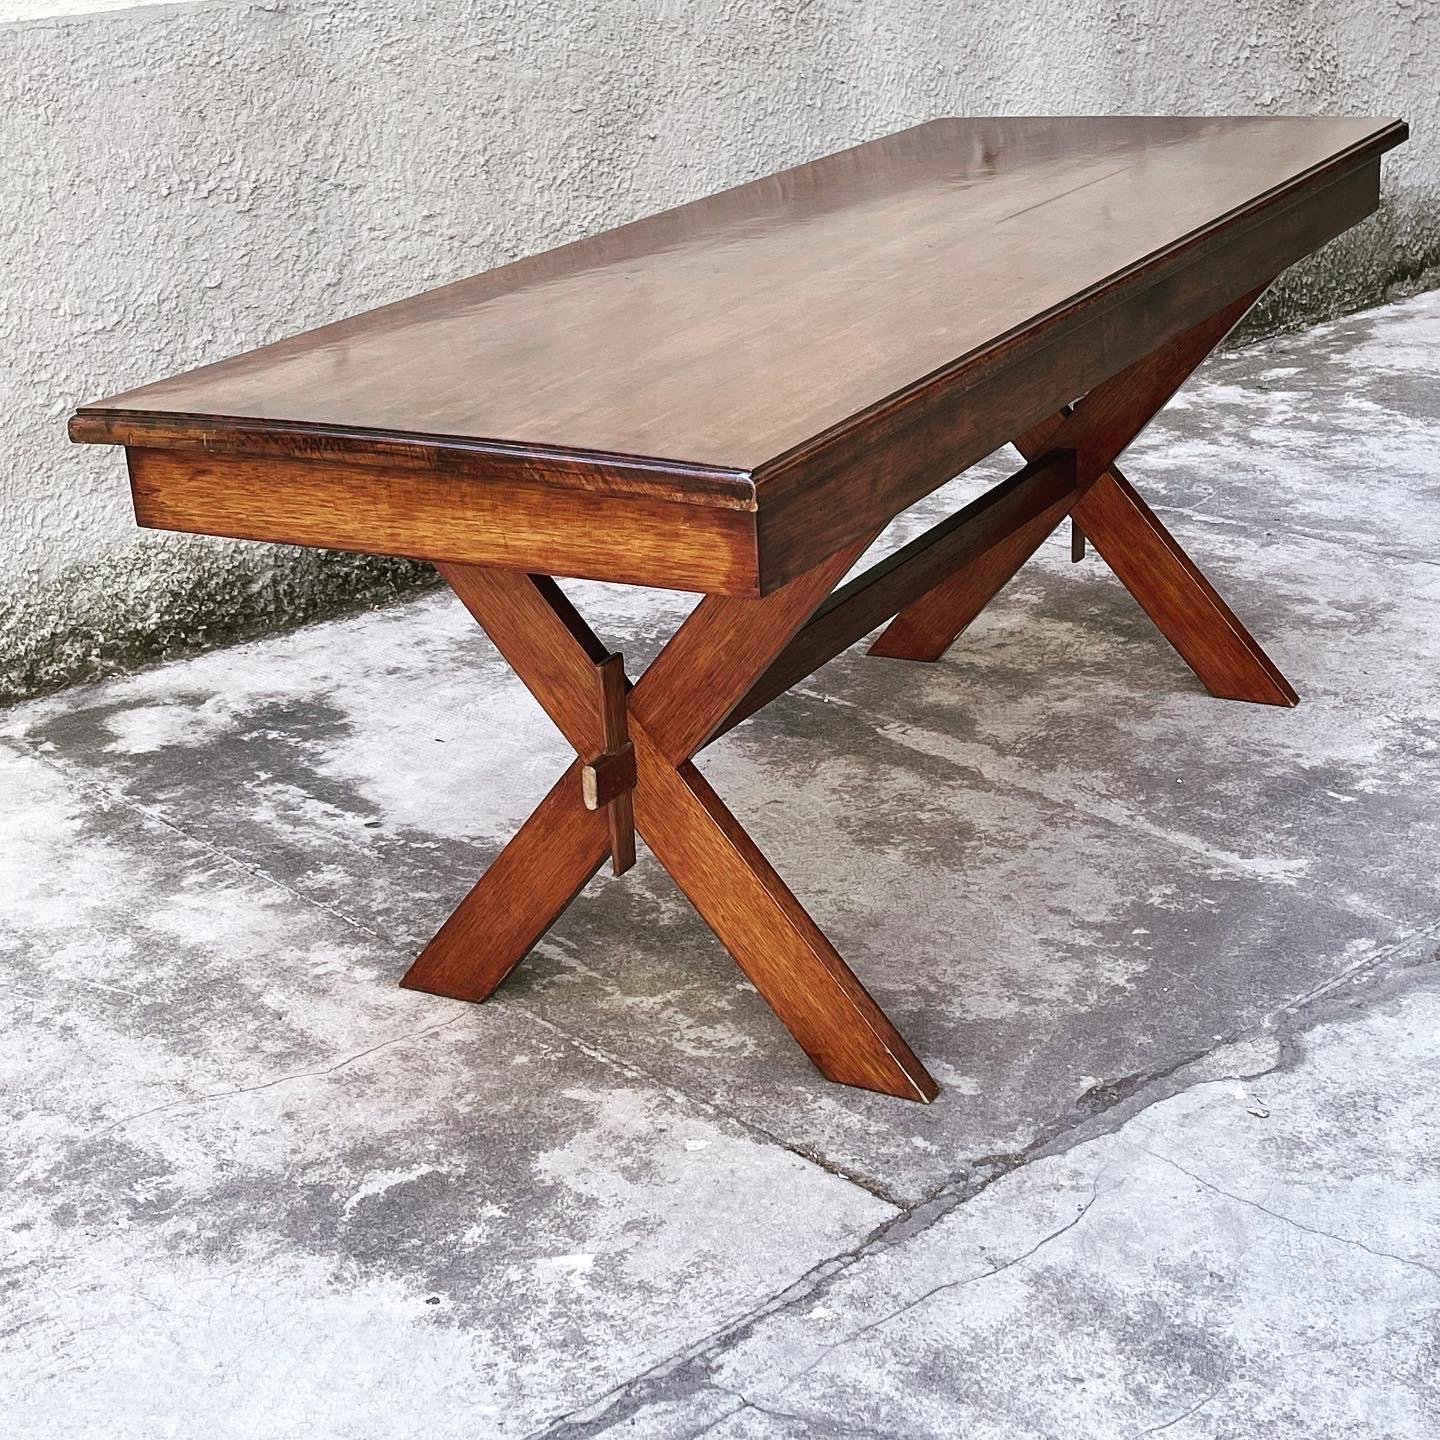 Rustic dining table with X-shaped legs in massive oak wood, made in Italy in the 1950s. Seats six people comfortably. The table is in very good condition.
